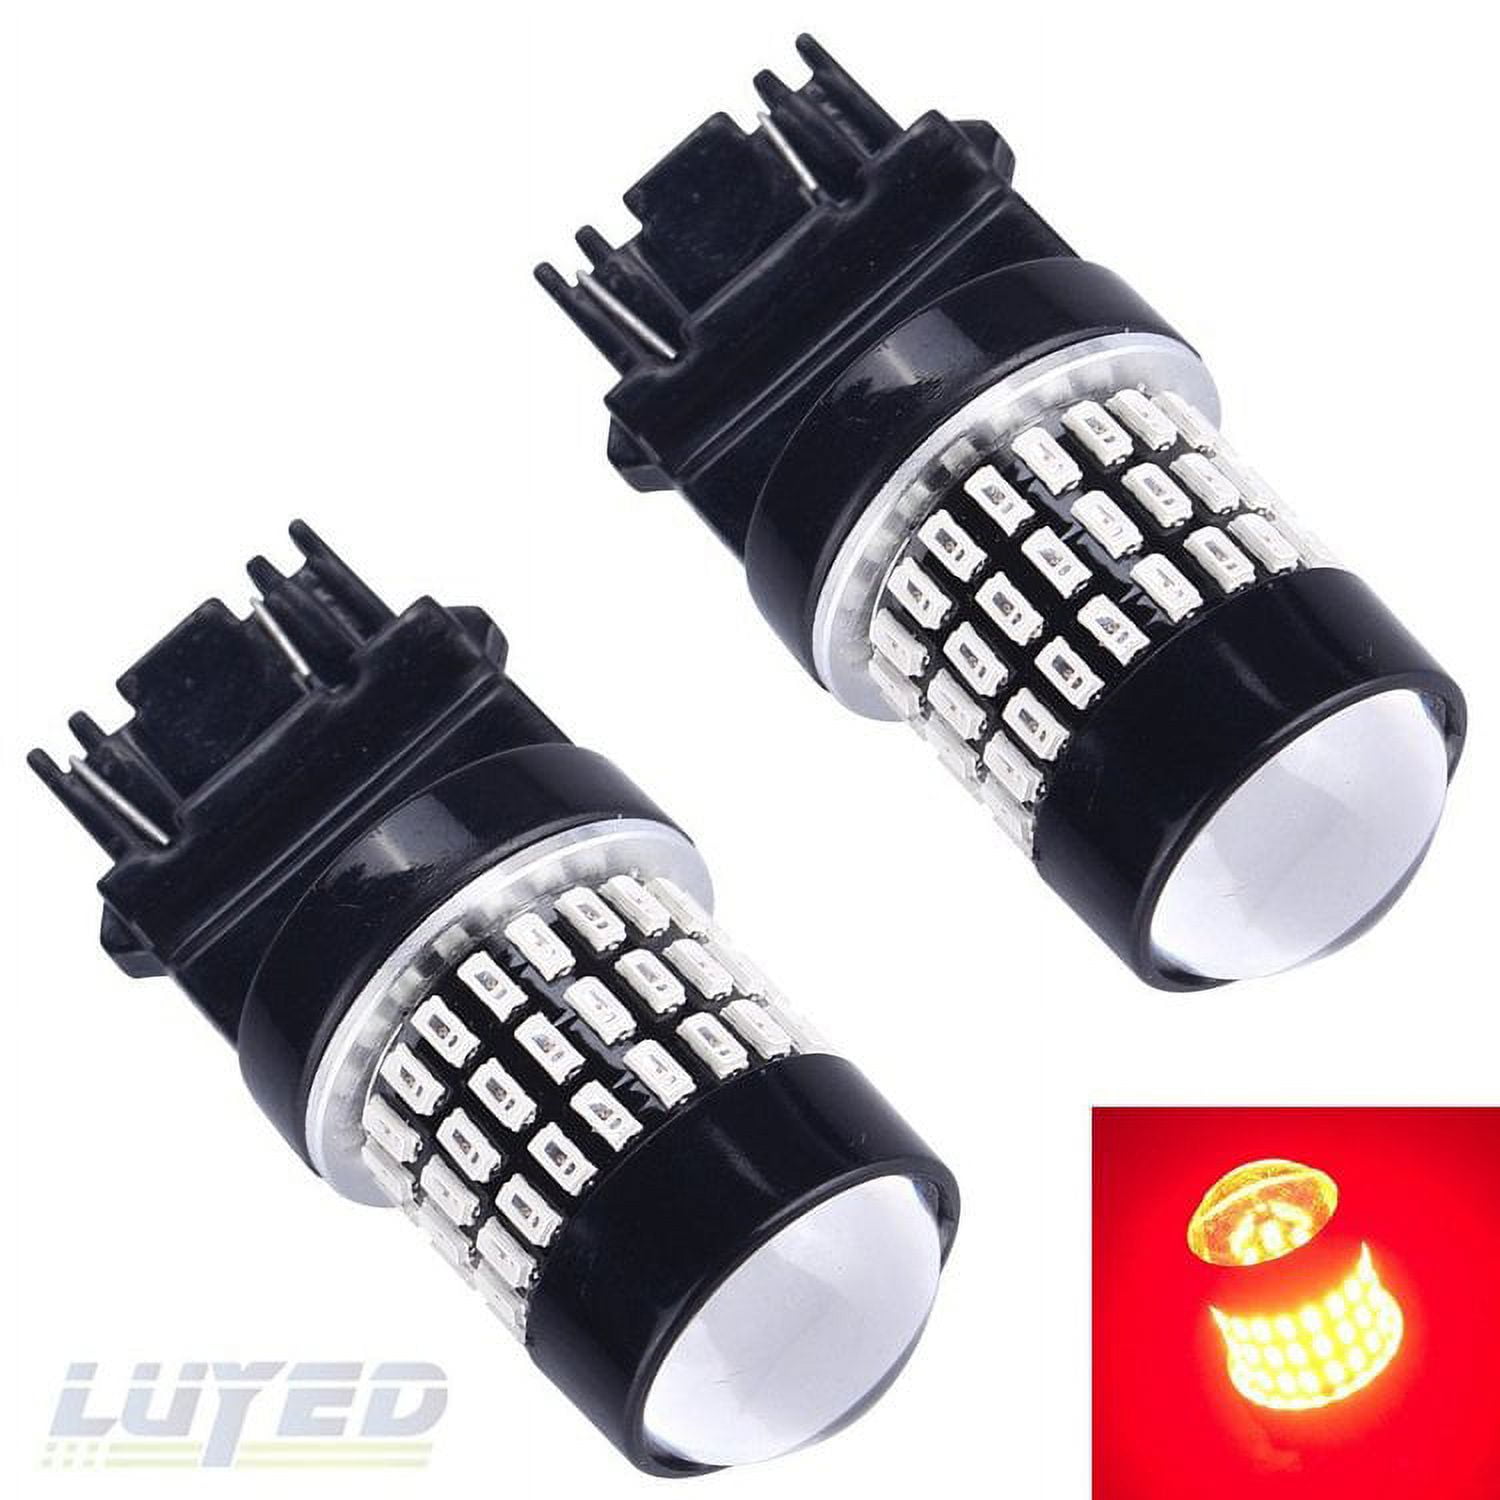 LUYED X 900 Lumens Super Bright 3014 78-EX Chipsets 3056 3156 3057 3157  LED Bulbs Used For Brake Lights,Tail Lights,Red